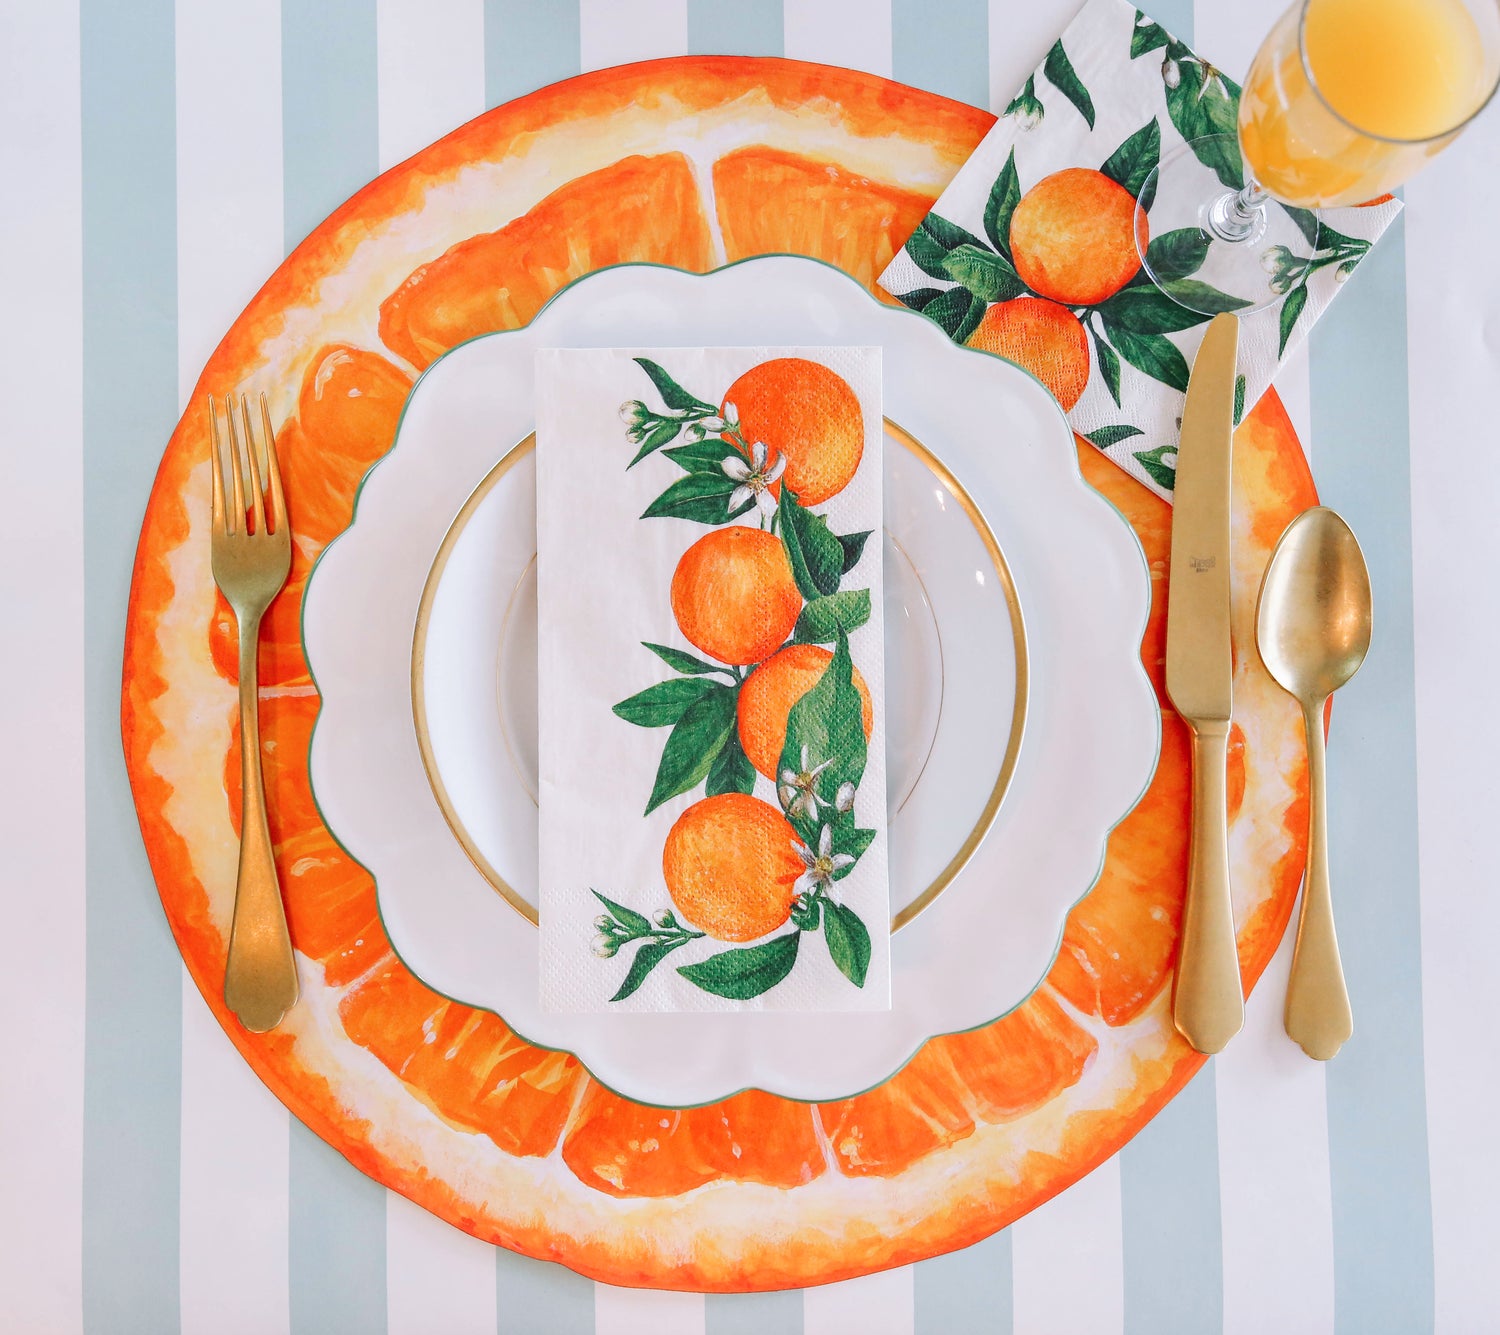 The Die-cut Orange Slice Placemat, centered under a plate in an elegant citrus-themed place setting.